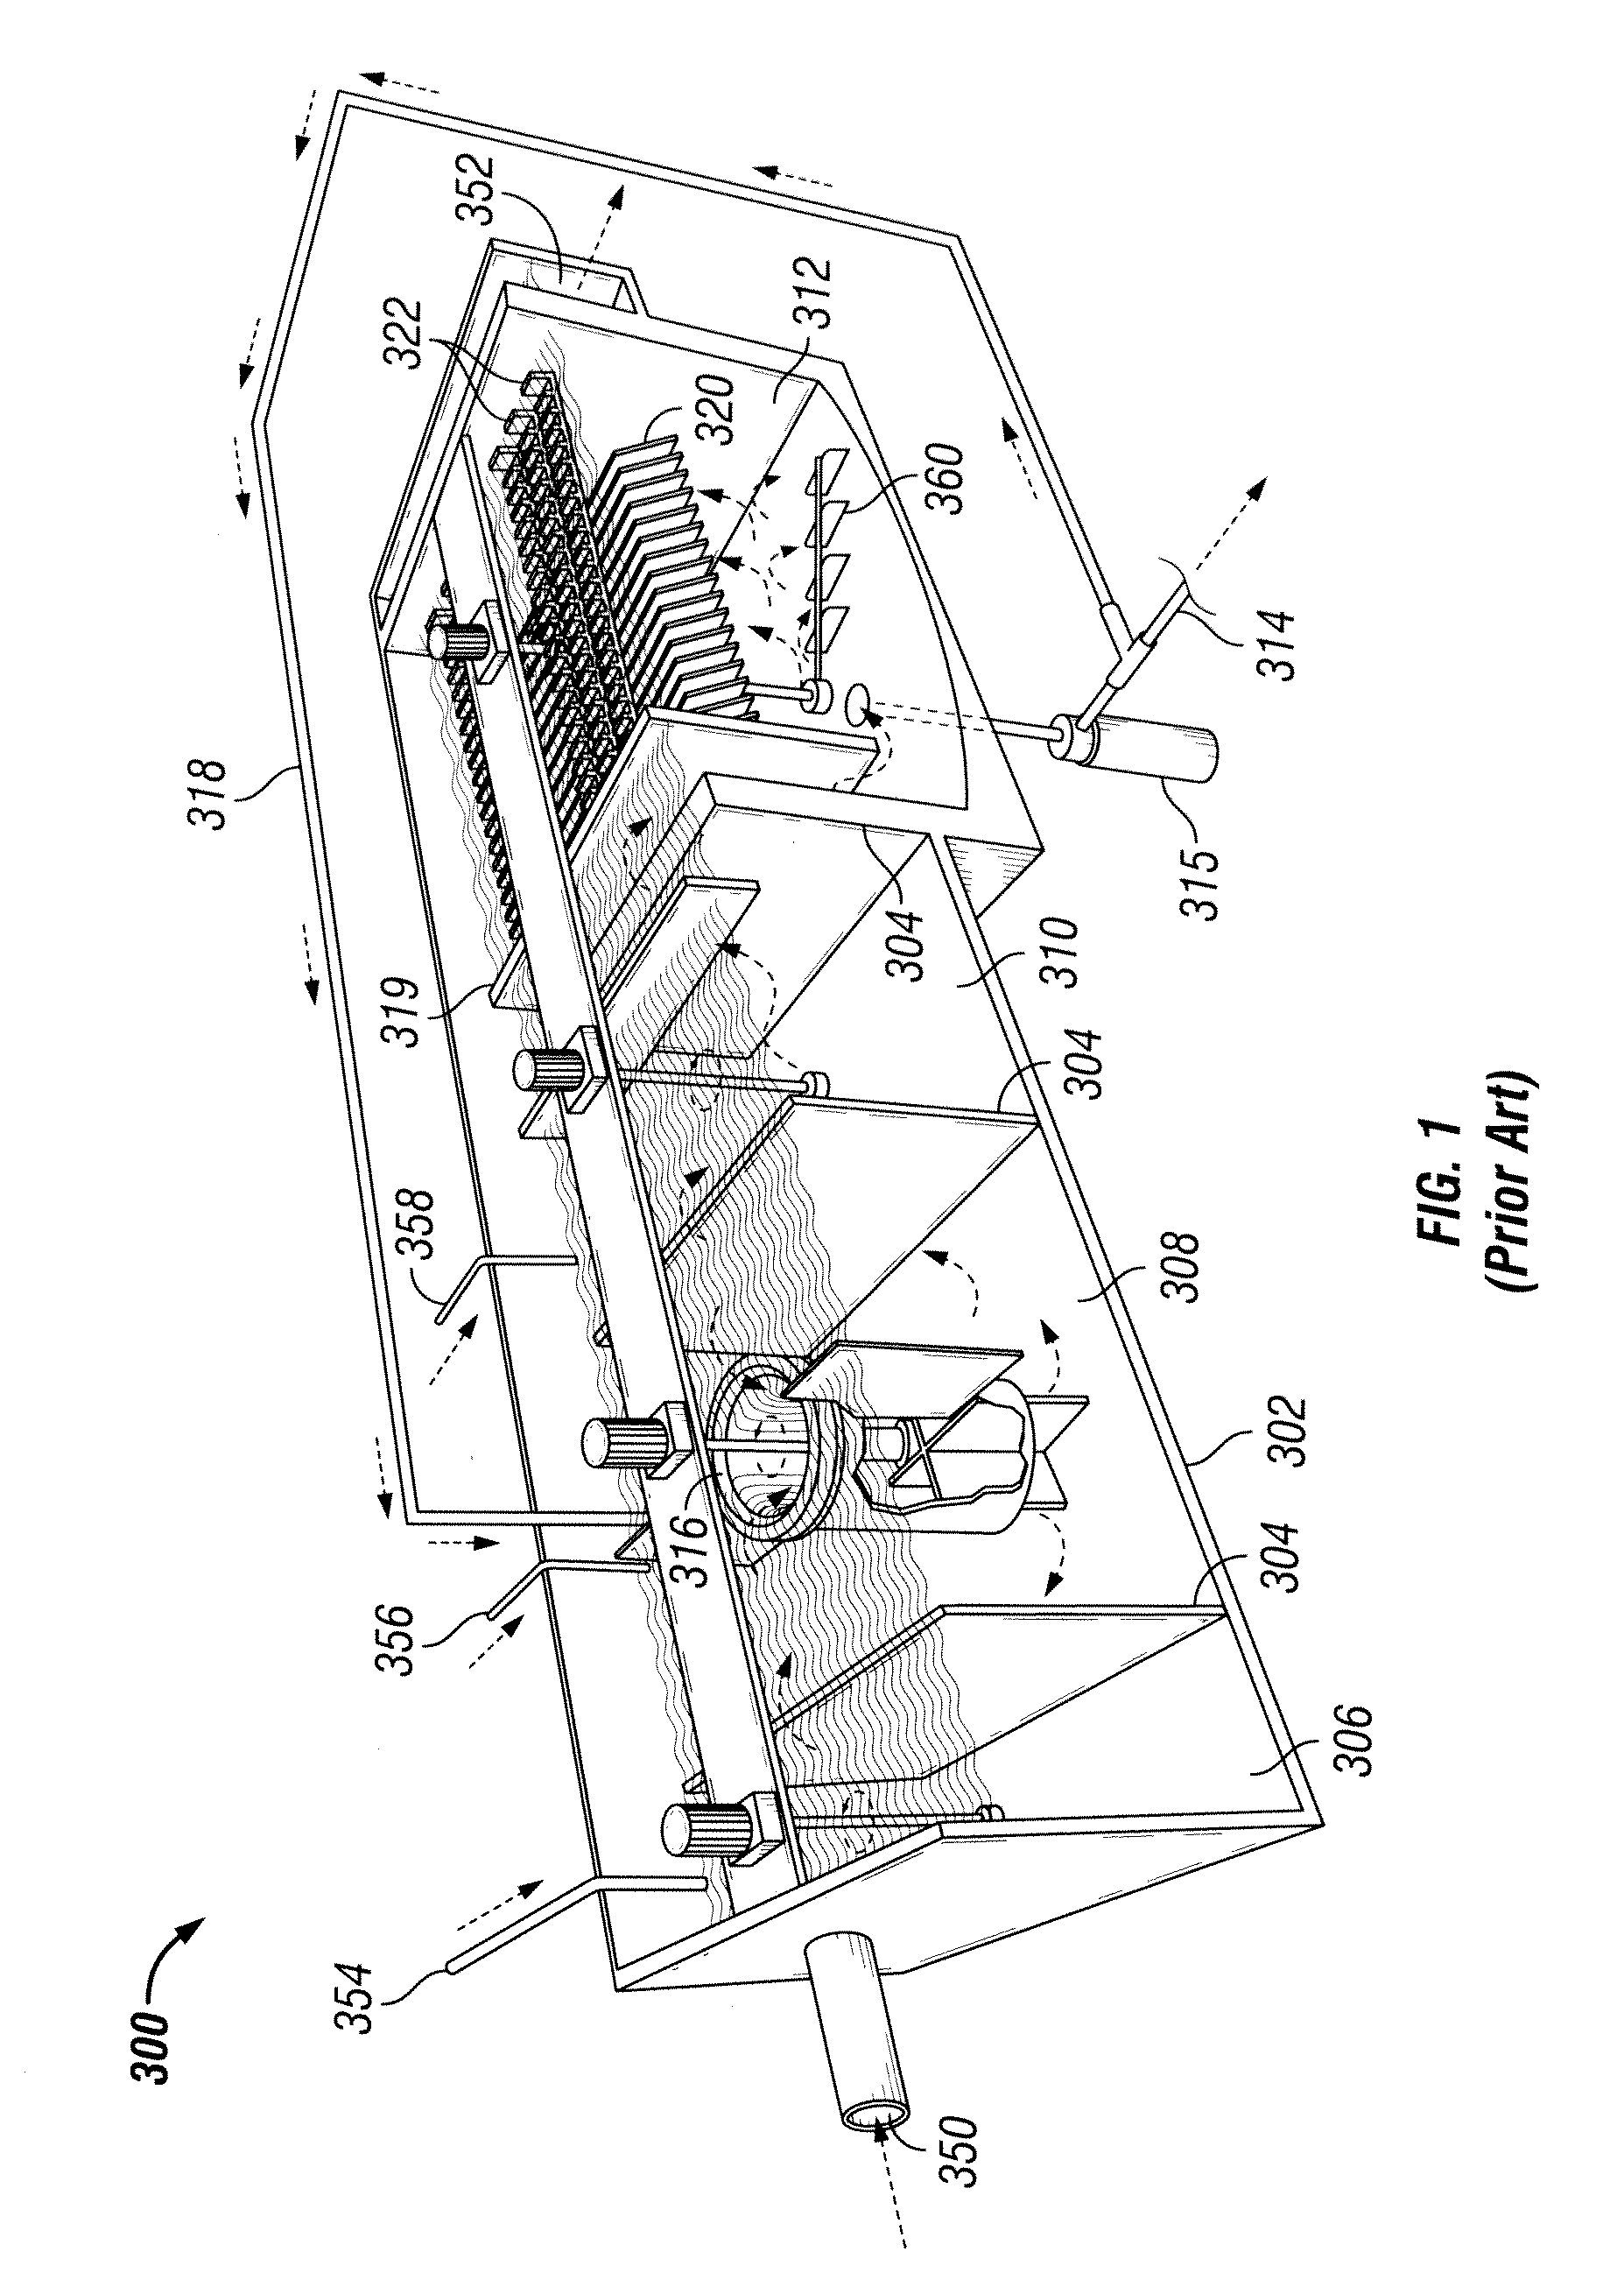 Method and apparatus for treating well flow-back and produced water or other wastewater